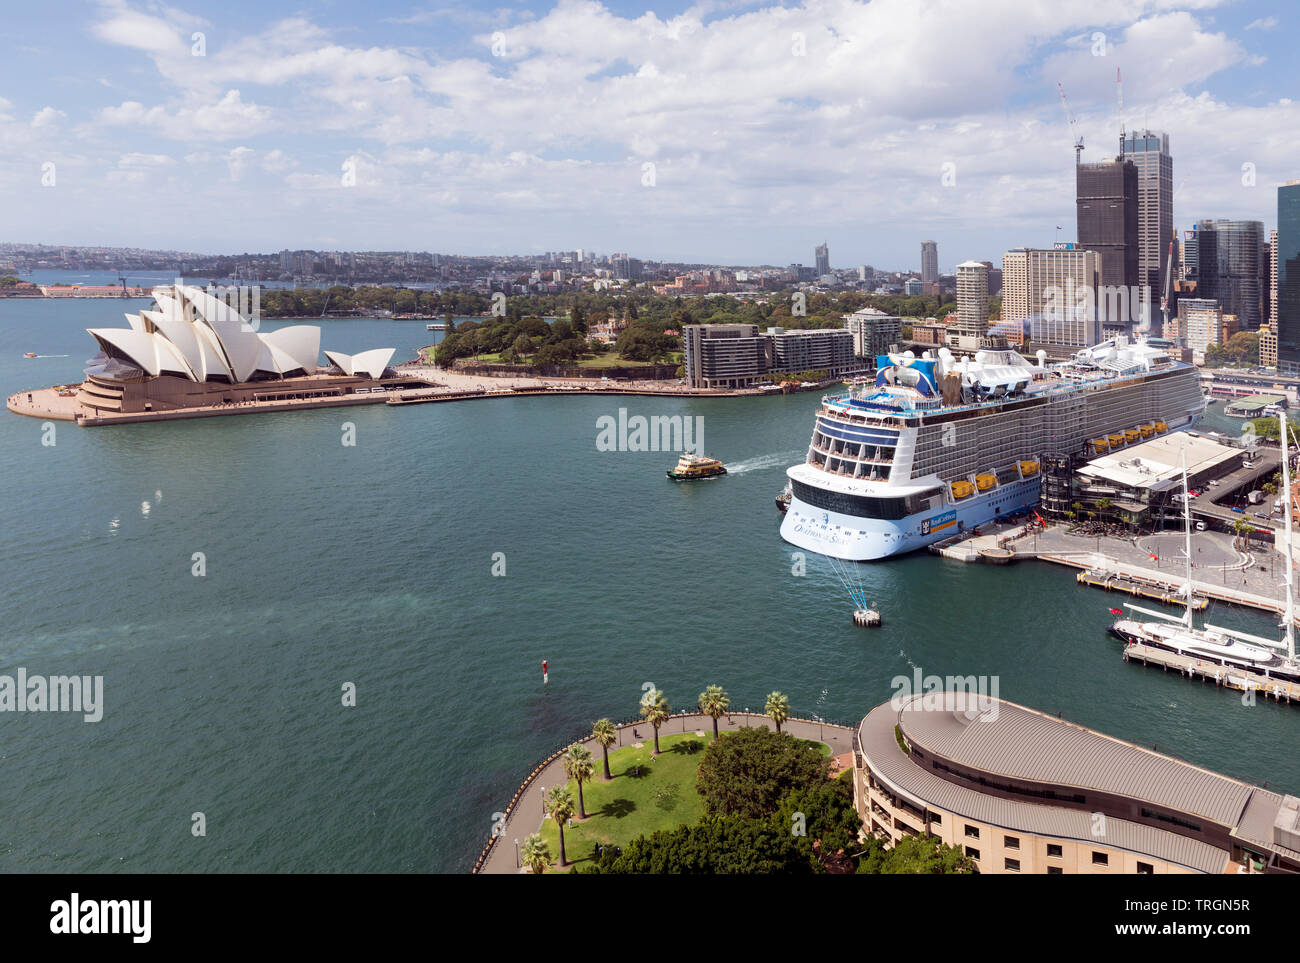 Australia, NSW, Sydney, a view of the city with a cruise ship and the Sydney Opera House Stock Photo